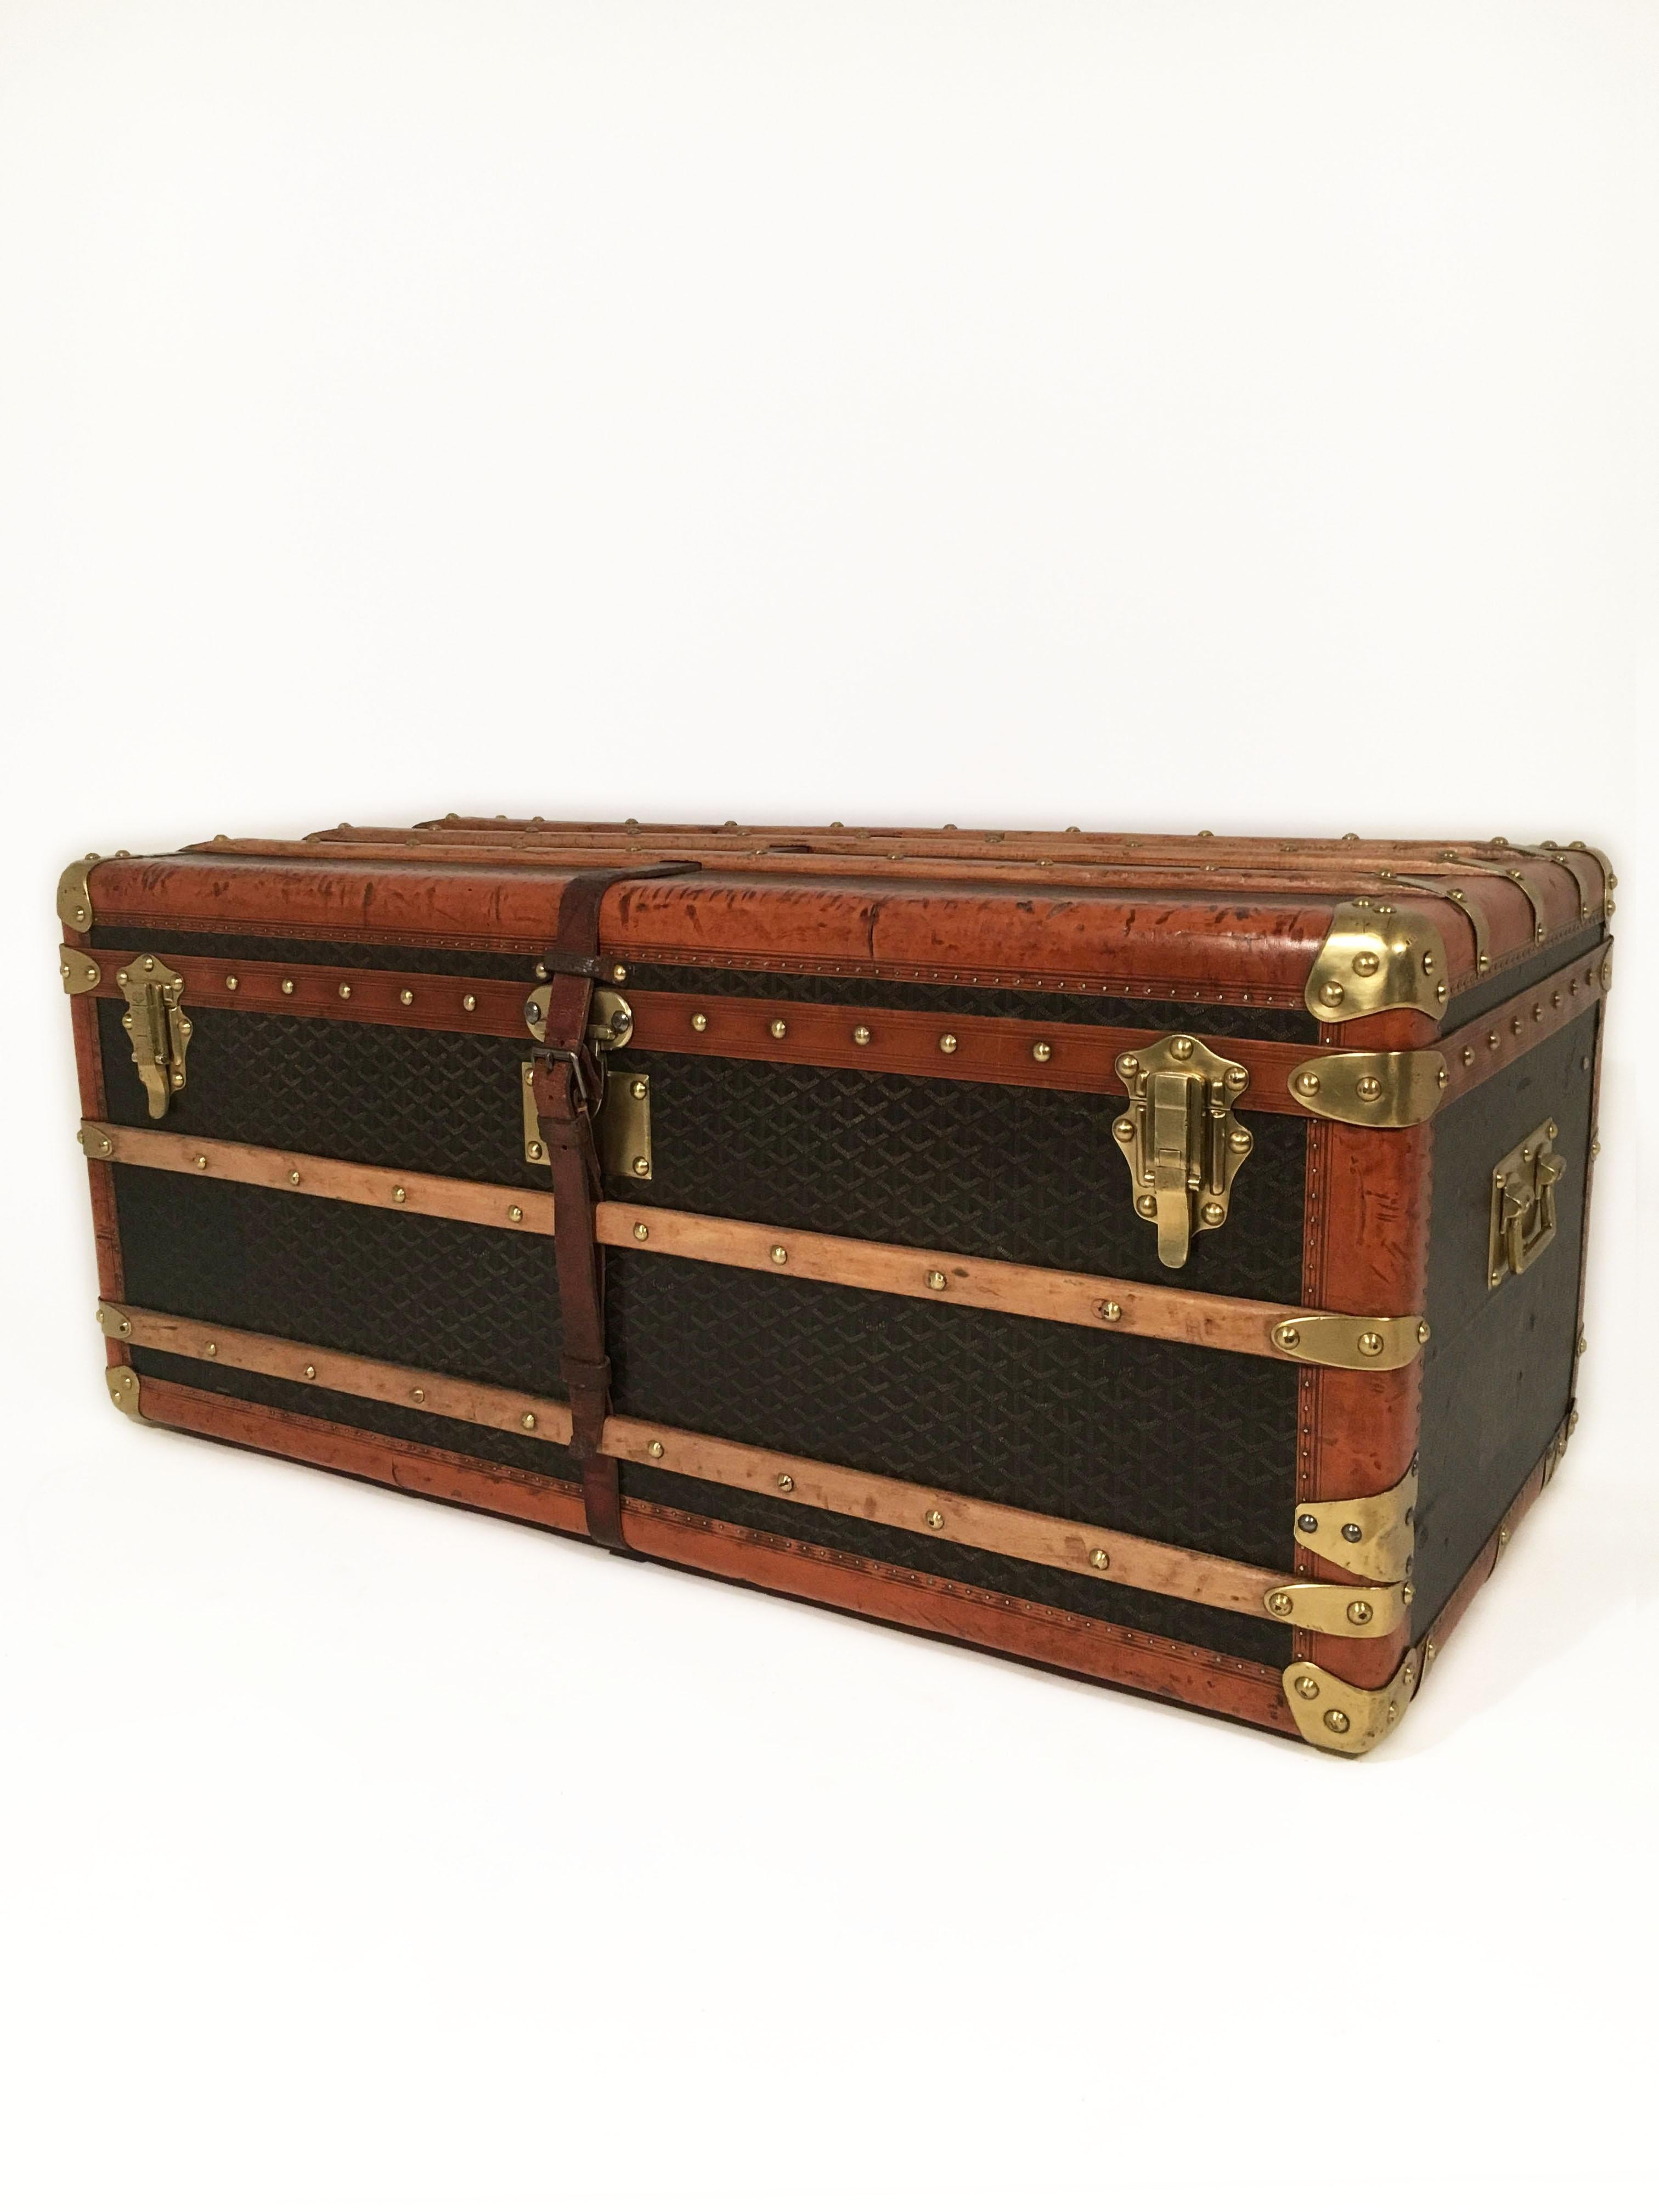 International Style Goyard Steamer Trunk from the Princely House of Thurn and Taxis For Sale